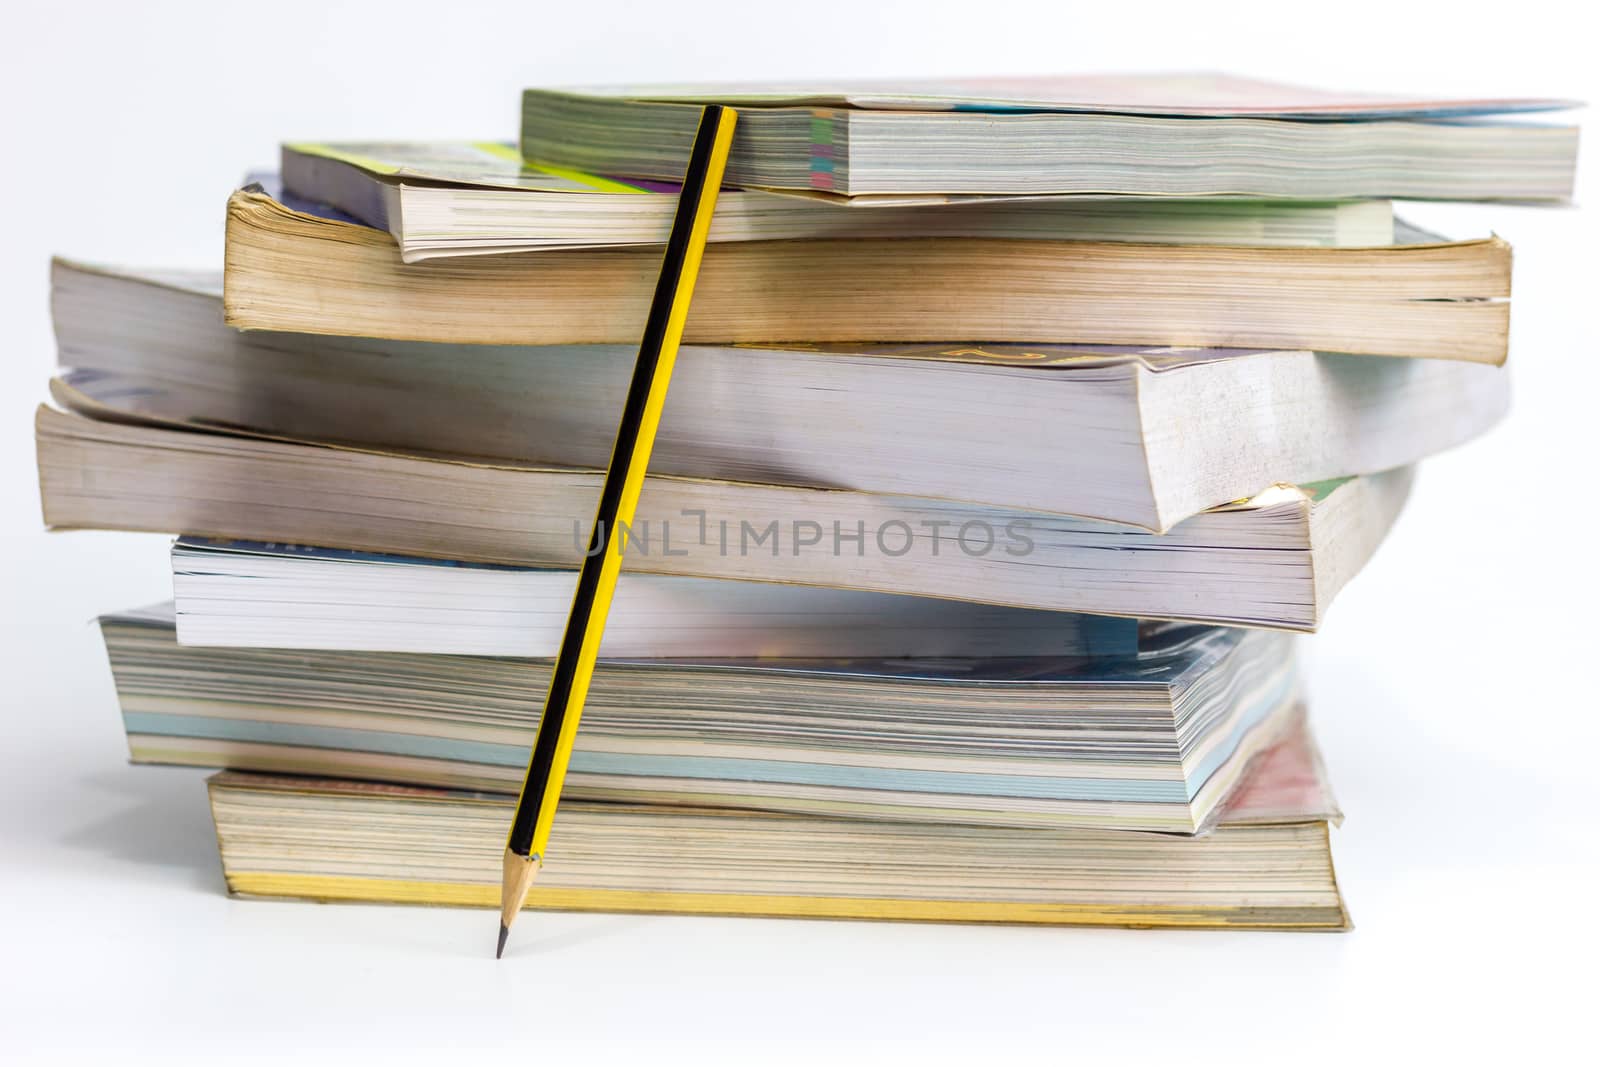 Many old books stacked and Pencil leaning beside the book on white background.